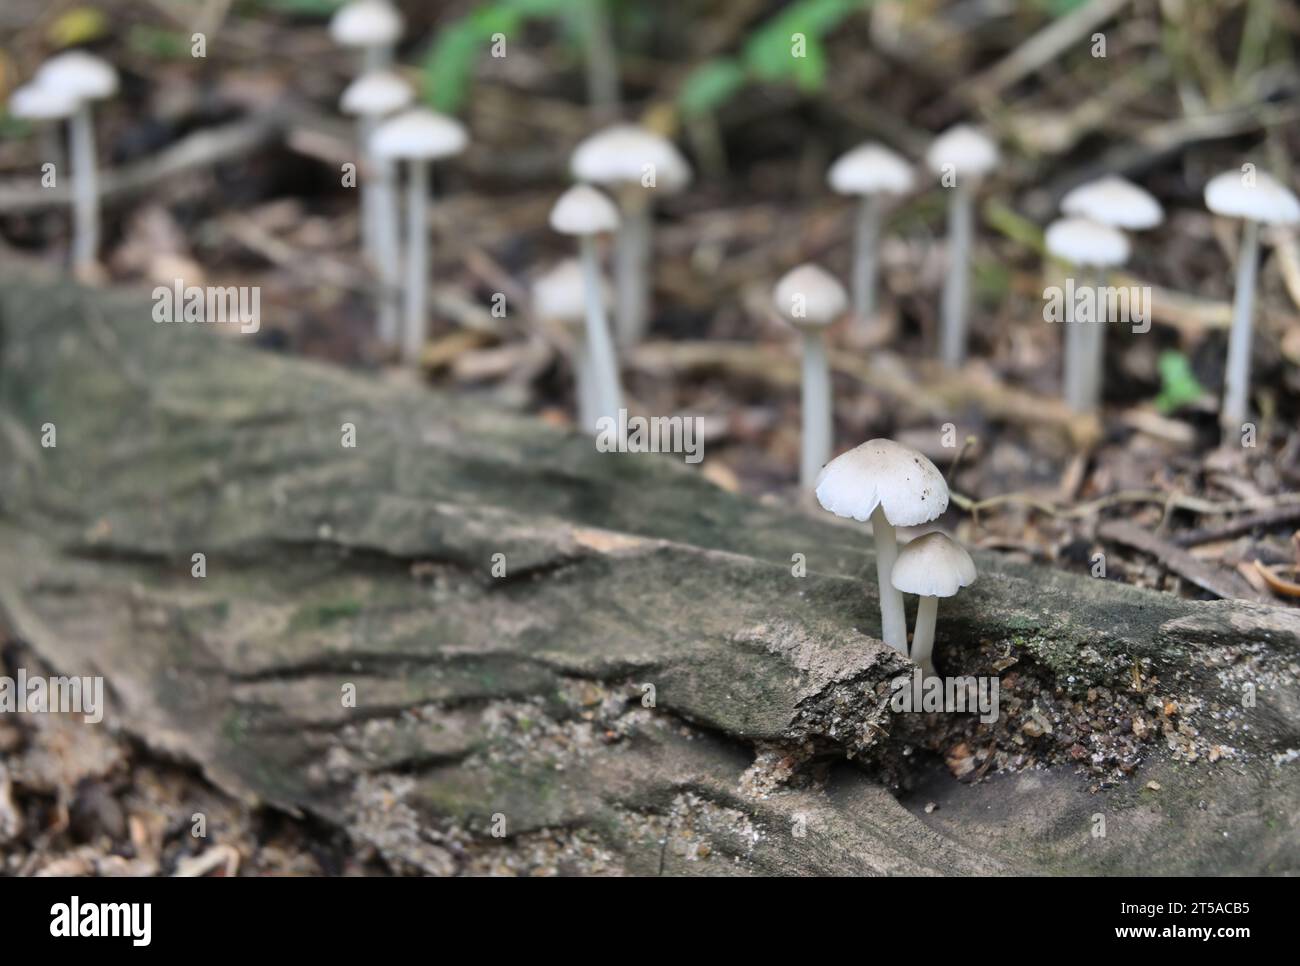 Two small white mushrooms (Termitomyces Microcarpus) are blooming inside a hole of a dead tree stem fallen on the ground. Several same variety mushroo Stock Photo